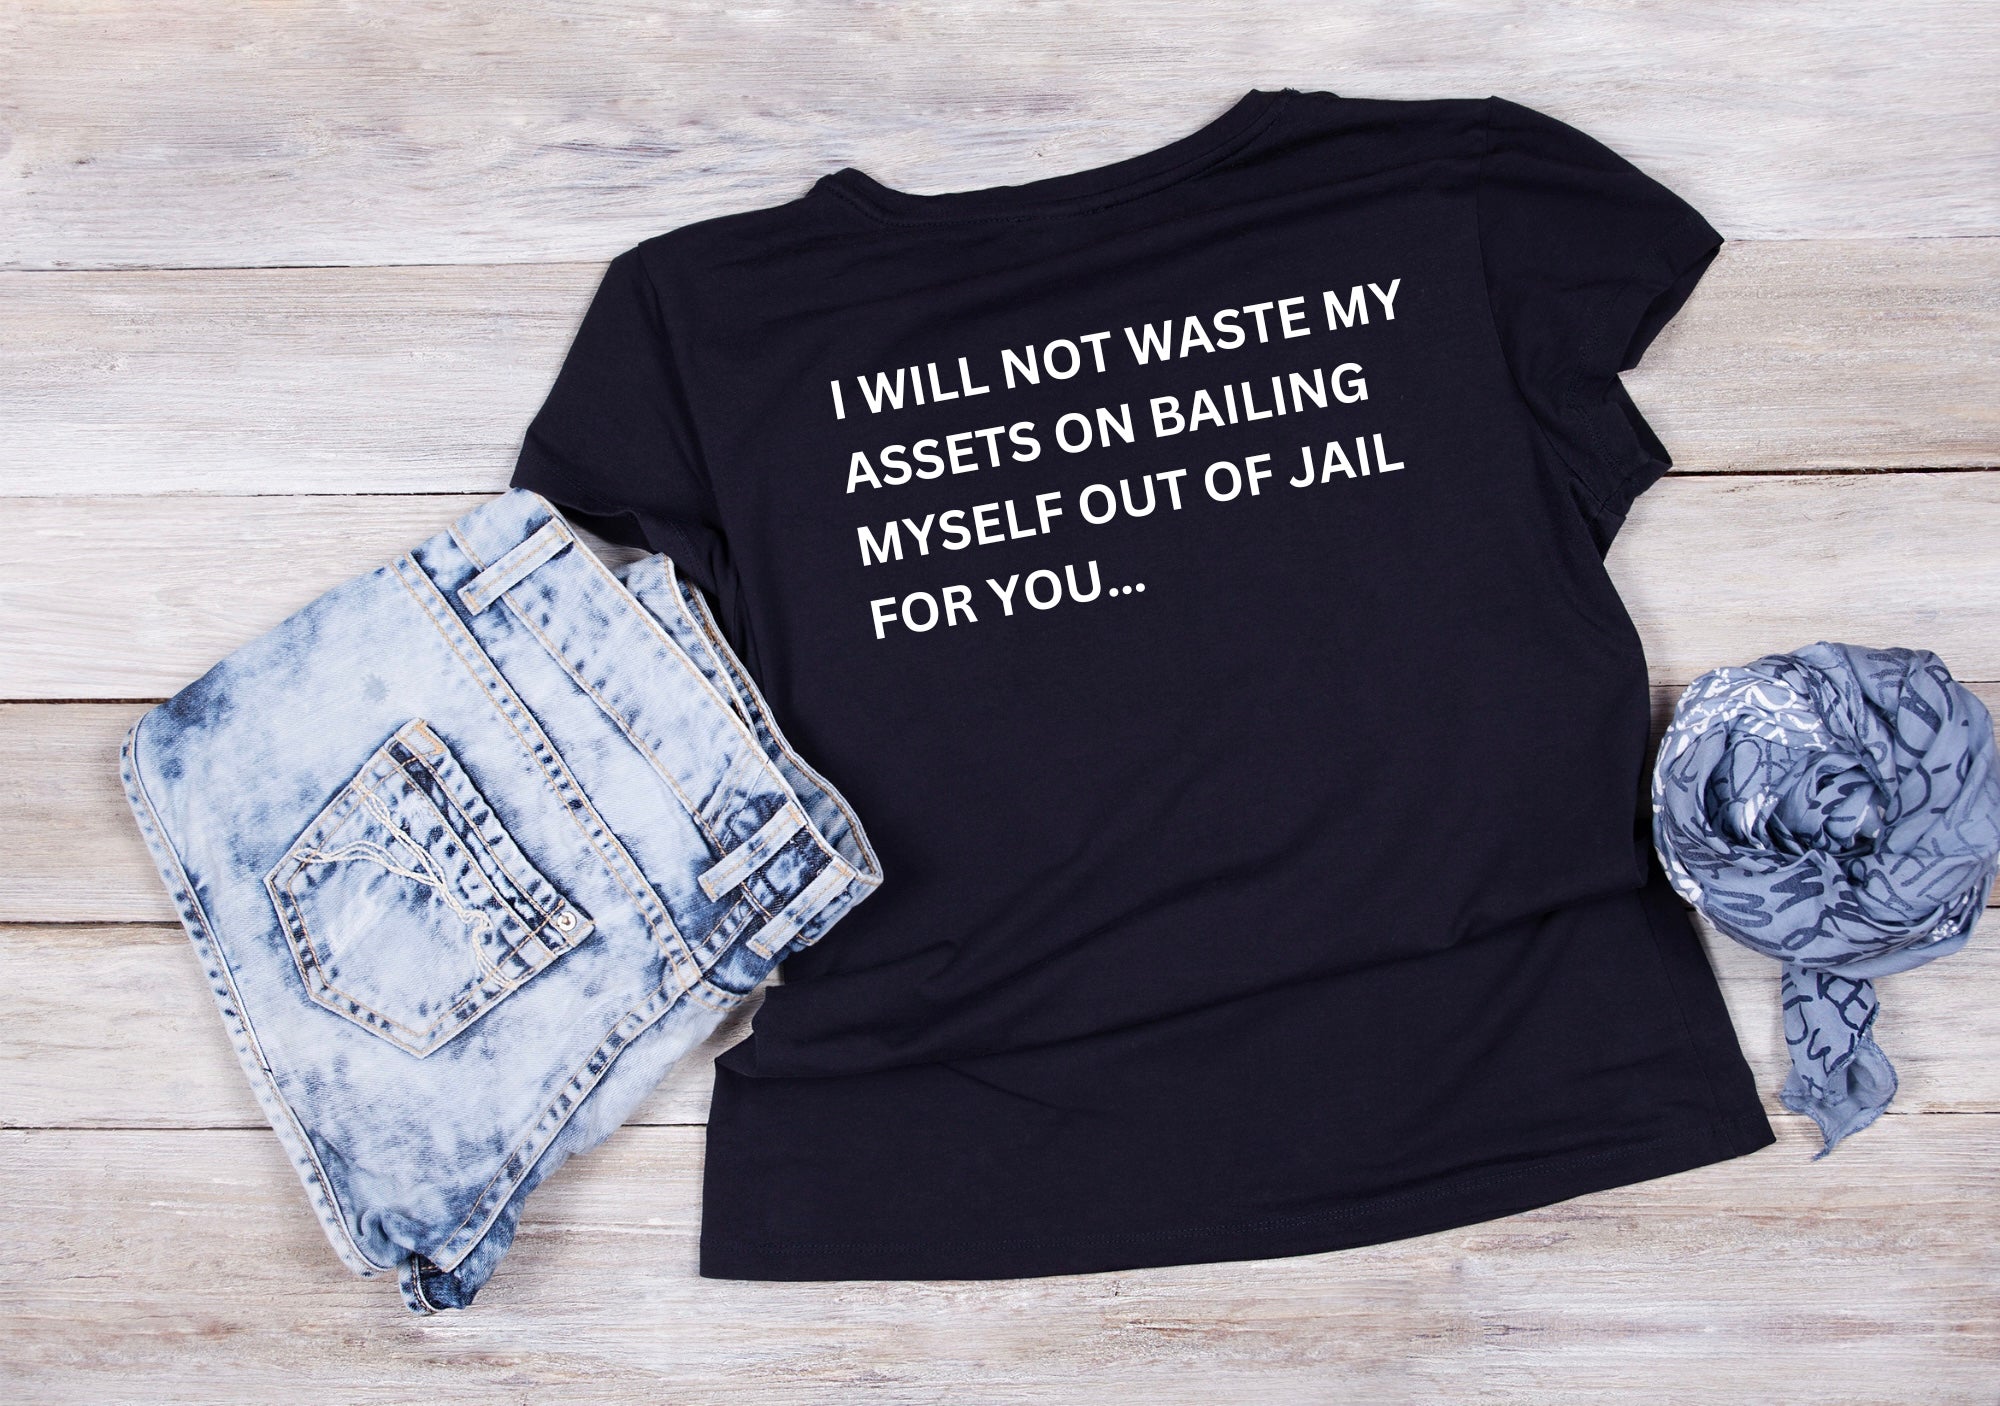 I Will Not Waste Assets on Bail Money